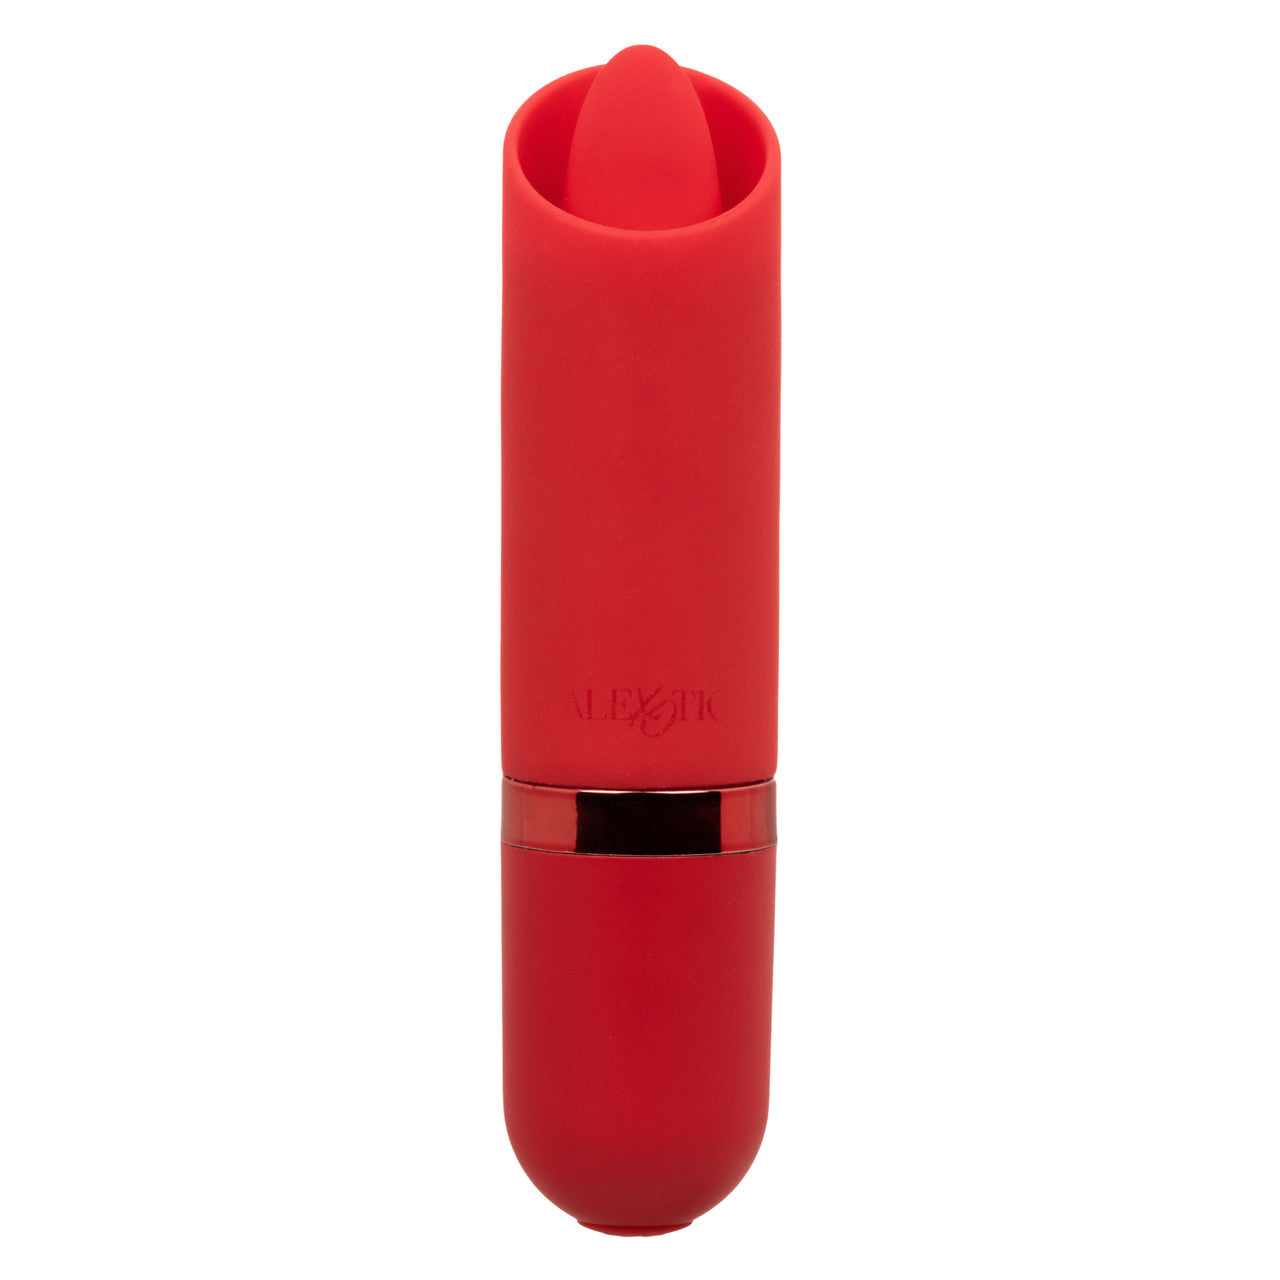 love yourself with this red lipstick-sized vibrator with small flappy tongue clitoral stimulator at the top